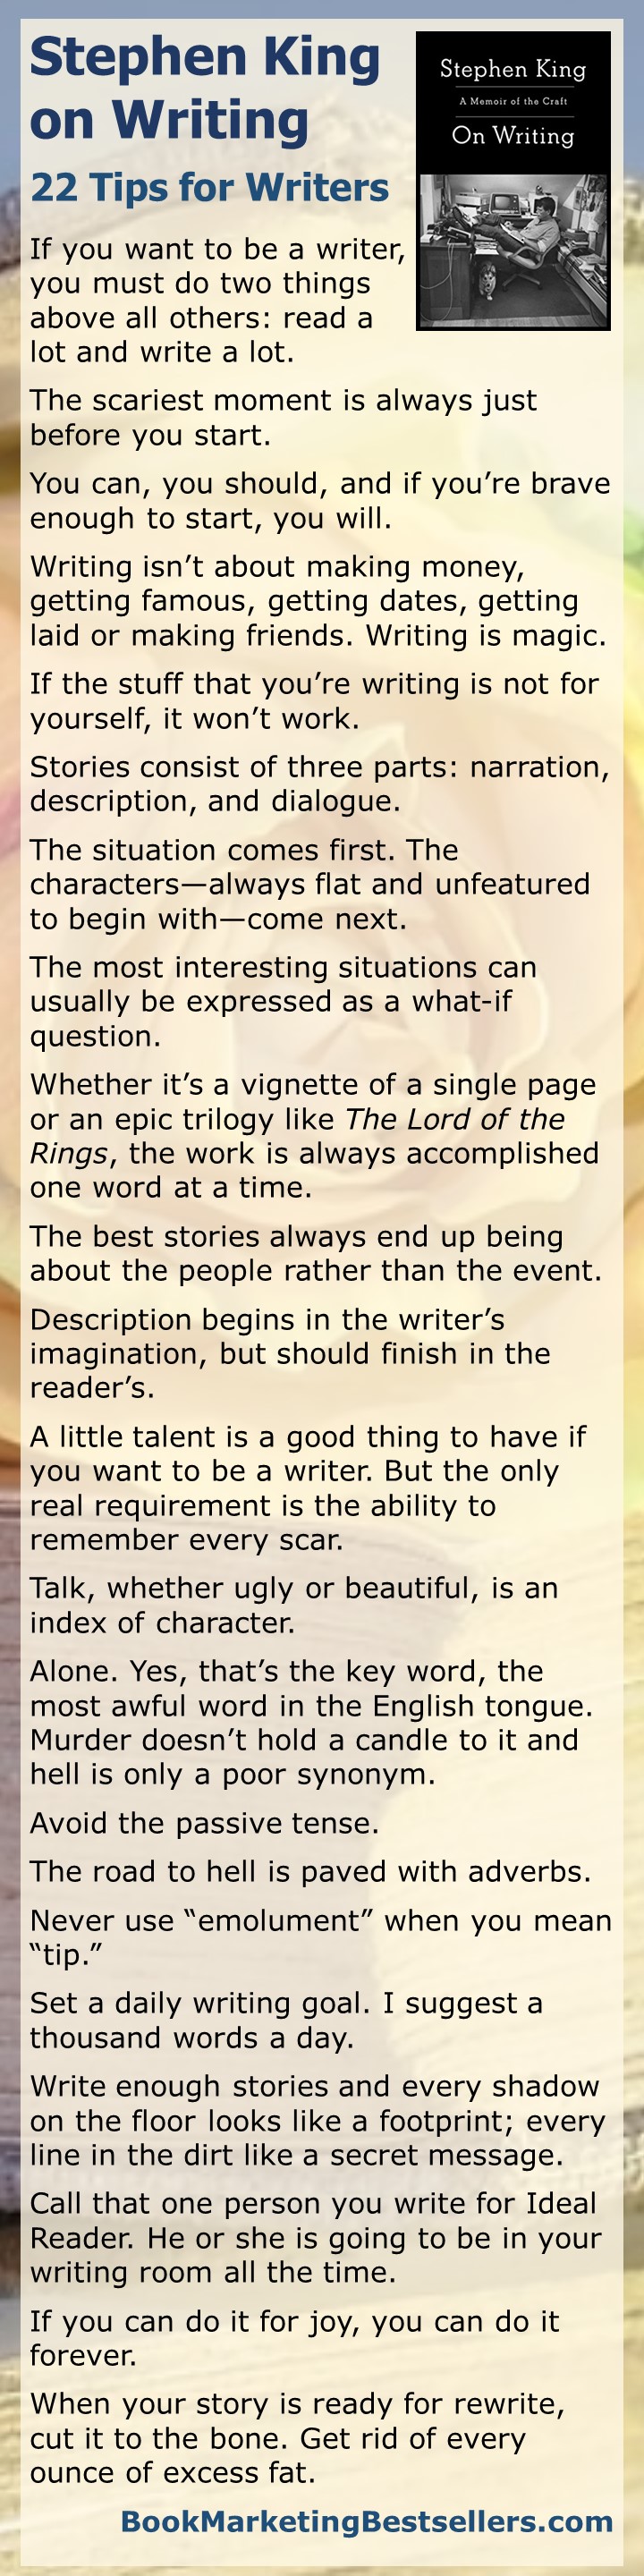 Stephen King on Writing: Here are just a few bits of advice on writing from Stephen King. Most of these 22 tips for writers are excerpted from Stephen's book On Writing. #writers #authors #writing